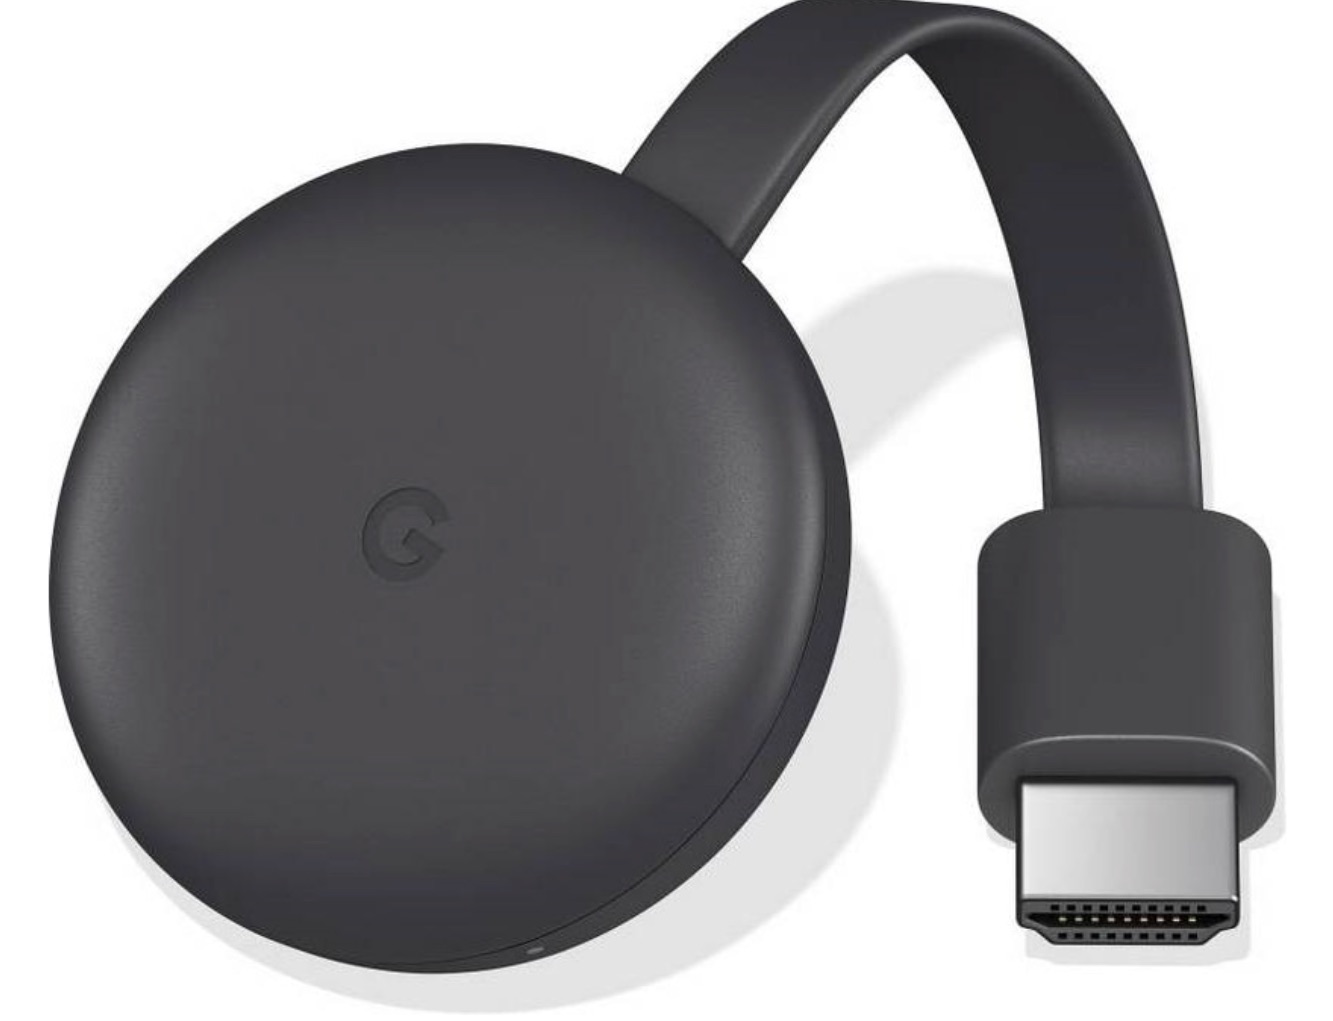 butik mangfoldighed fordampning How to Chromecast from iPhone • macReports